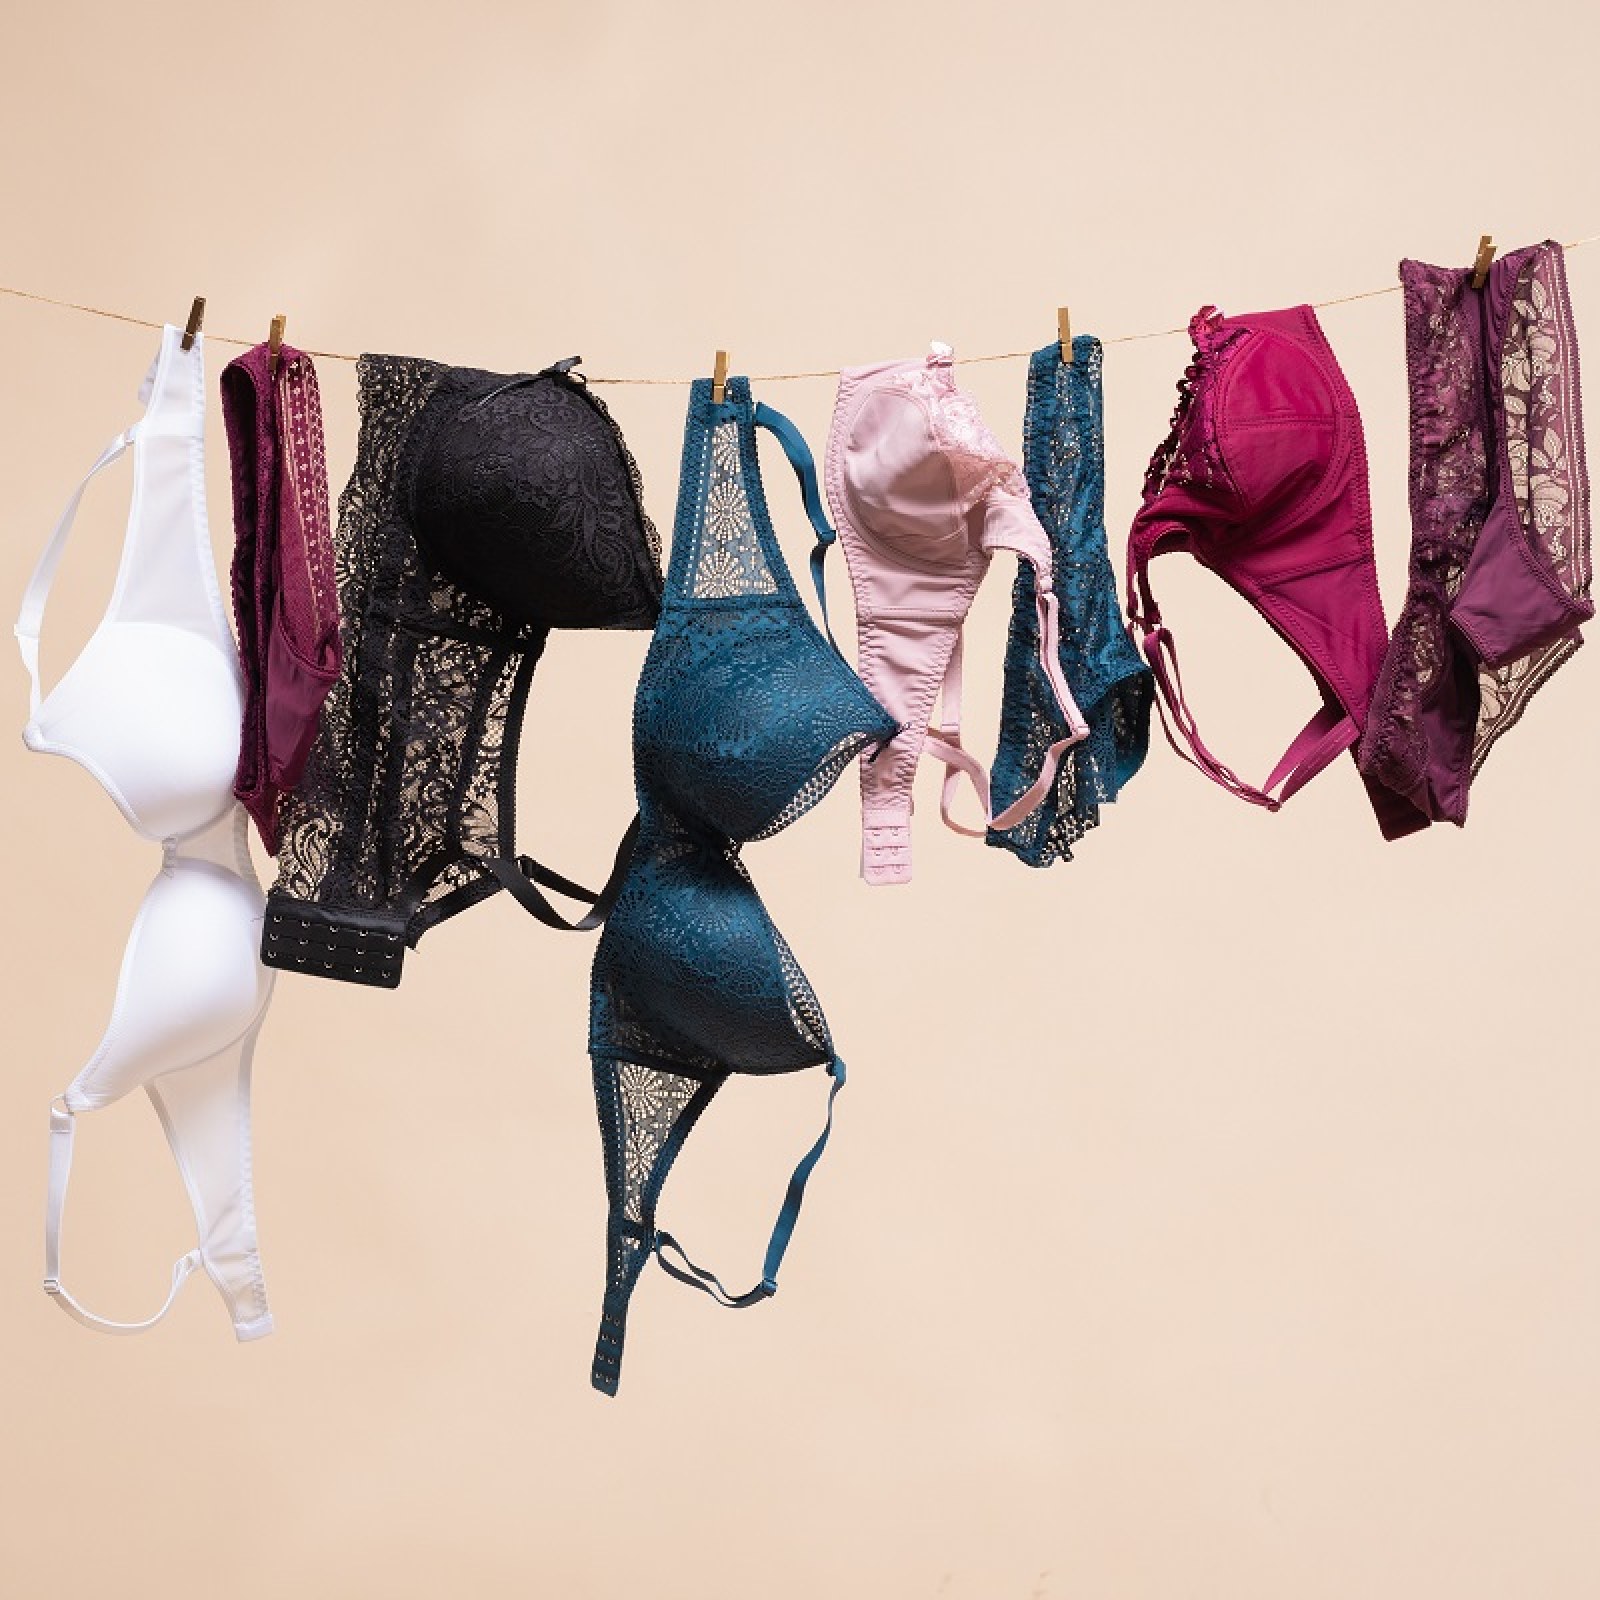 How often should you wash your bra & when do you need to replace your undies?